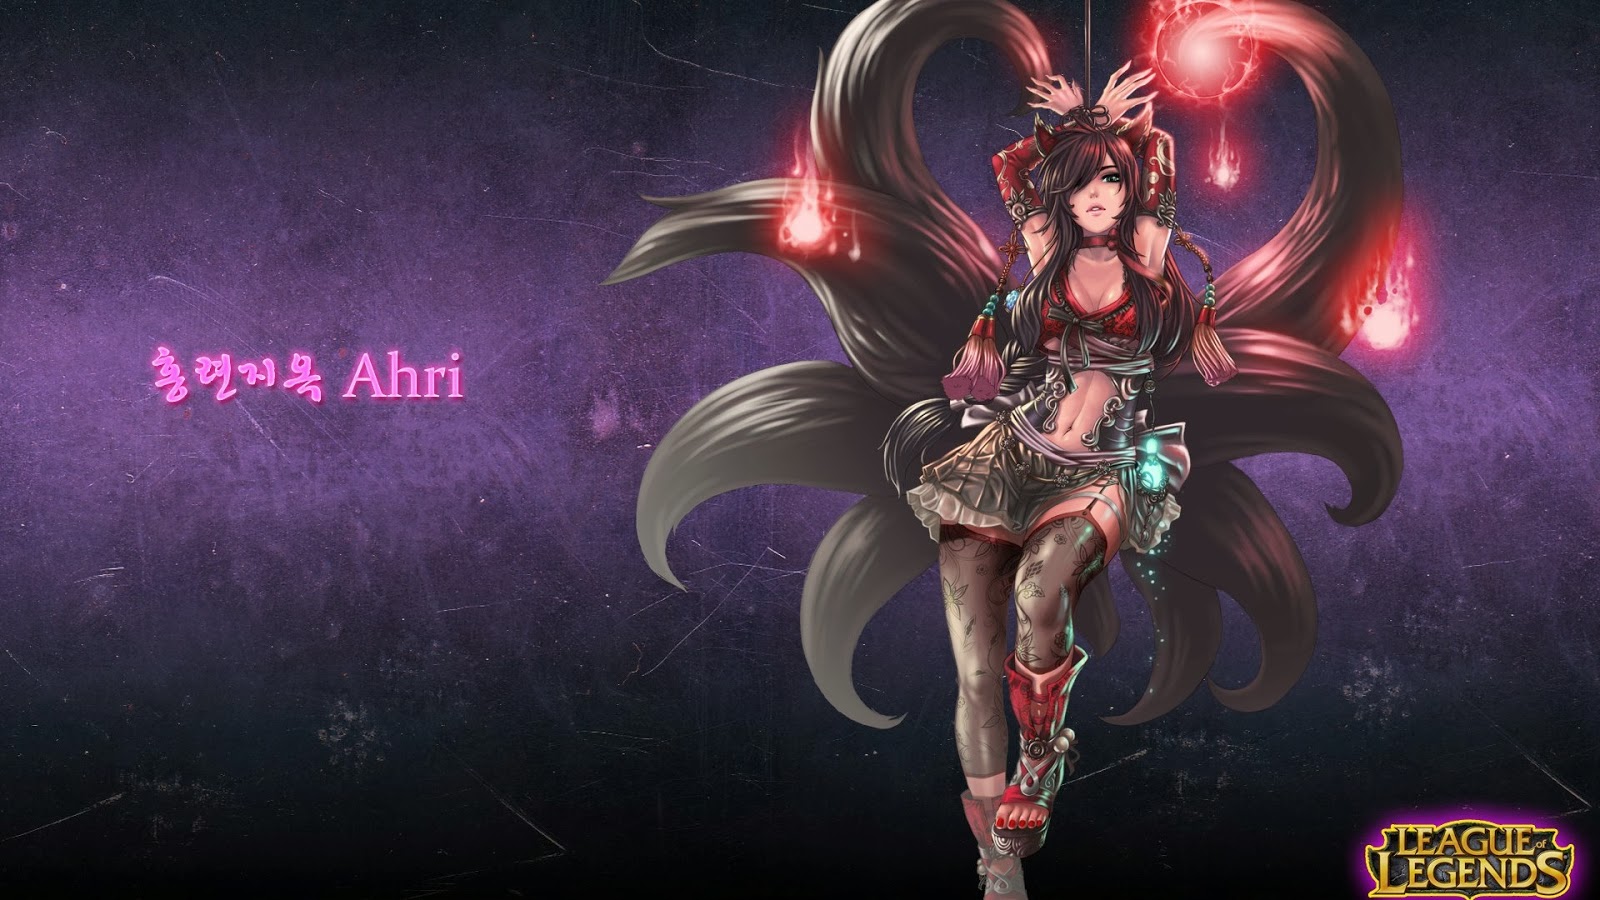 League Of Legends Wallpaper And Cover Photos Blog Ahri League Of Legends Wallpaper Ahri Desktop Wallpaper